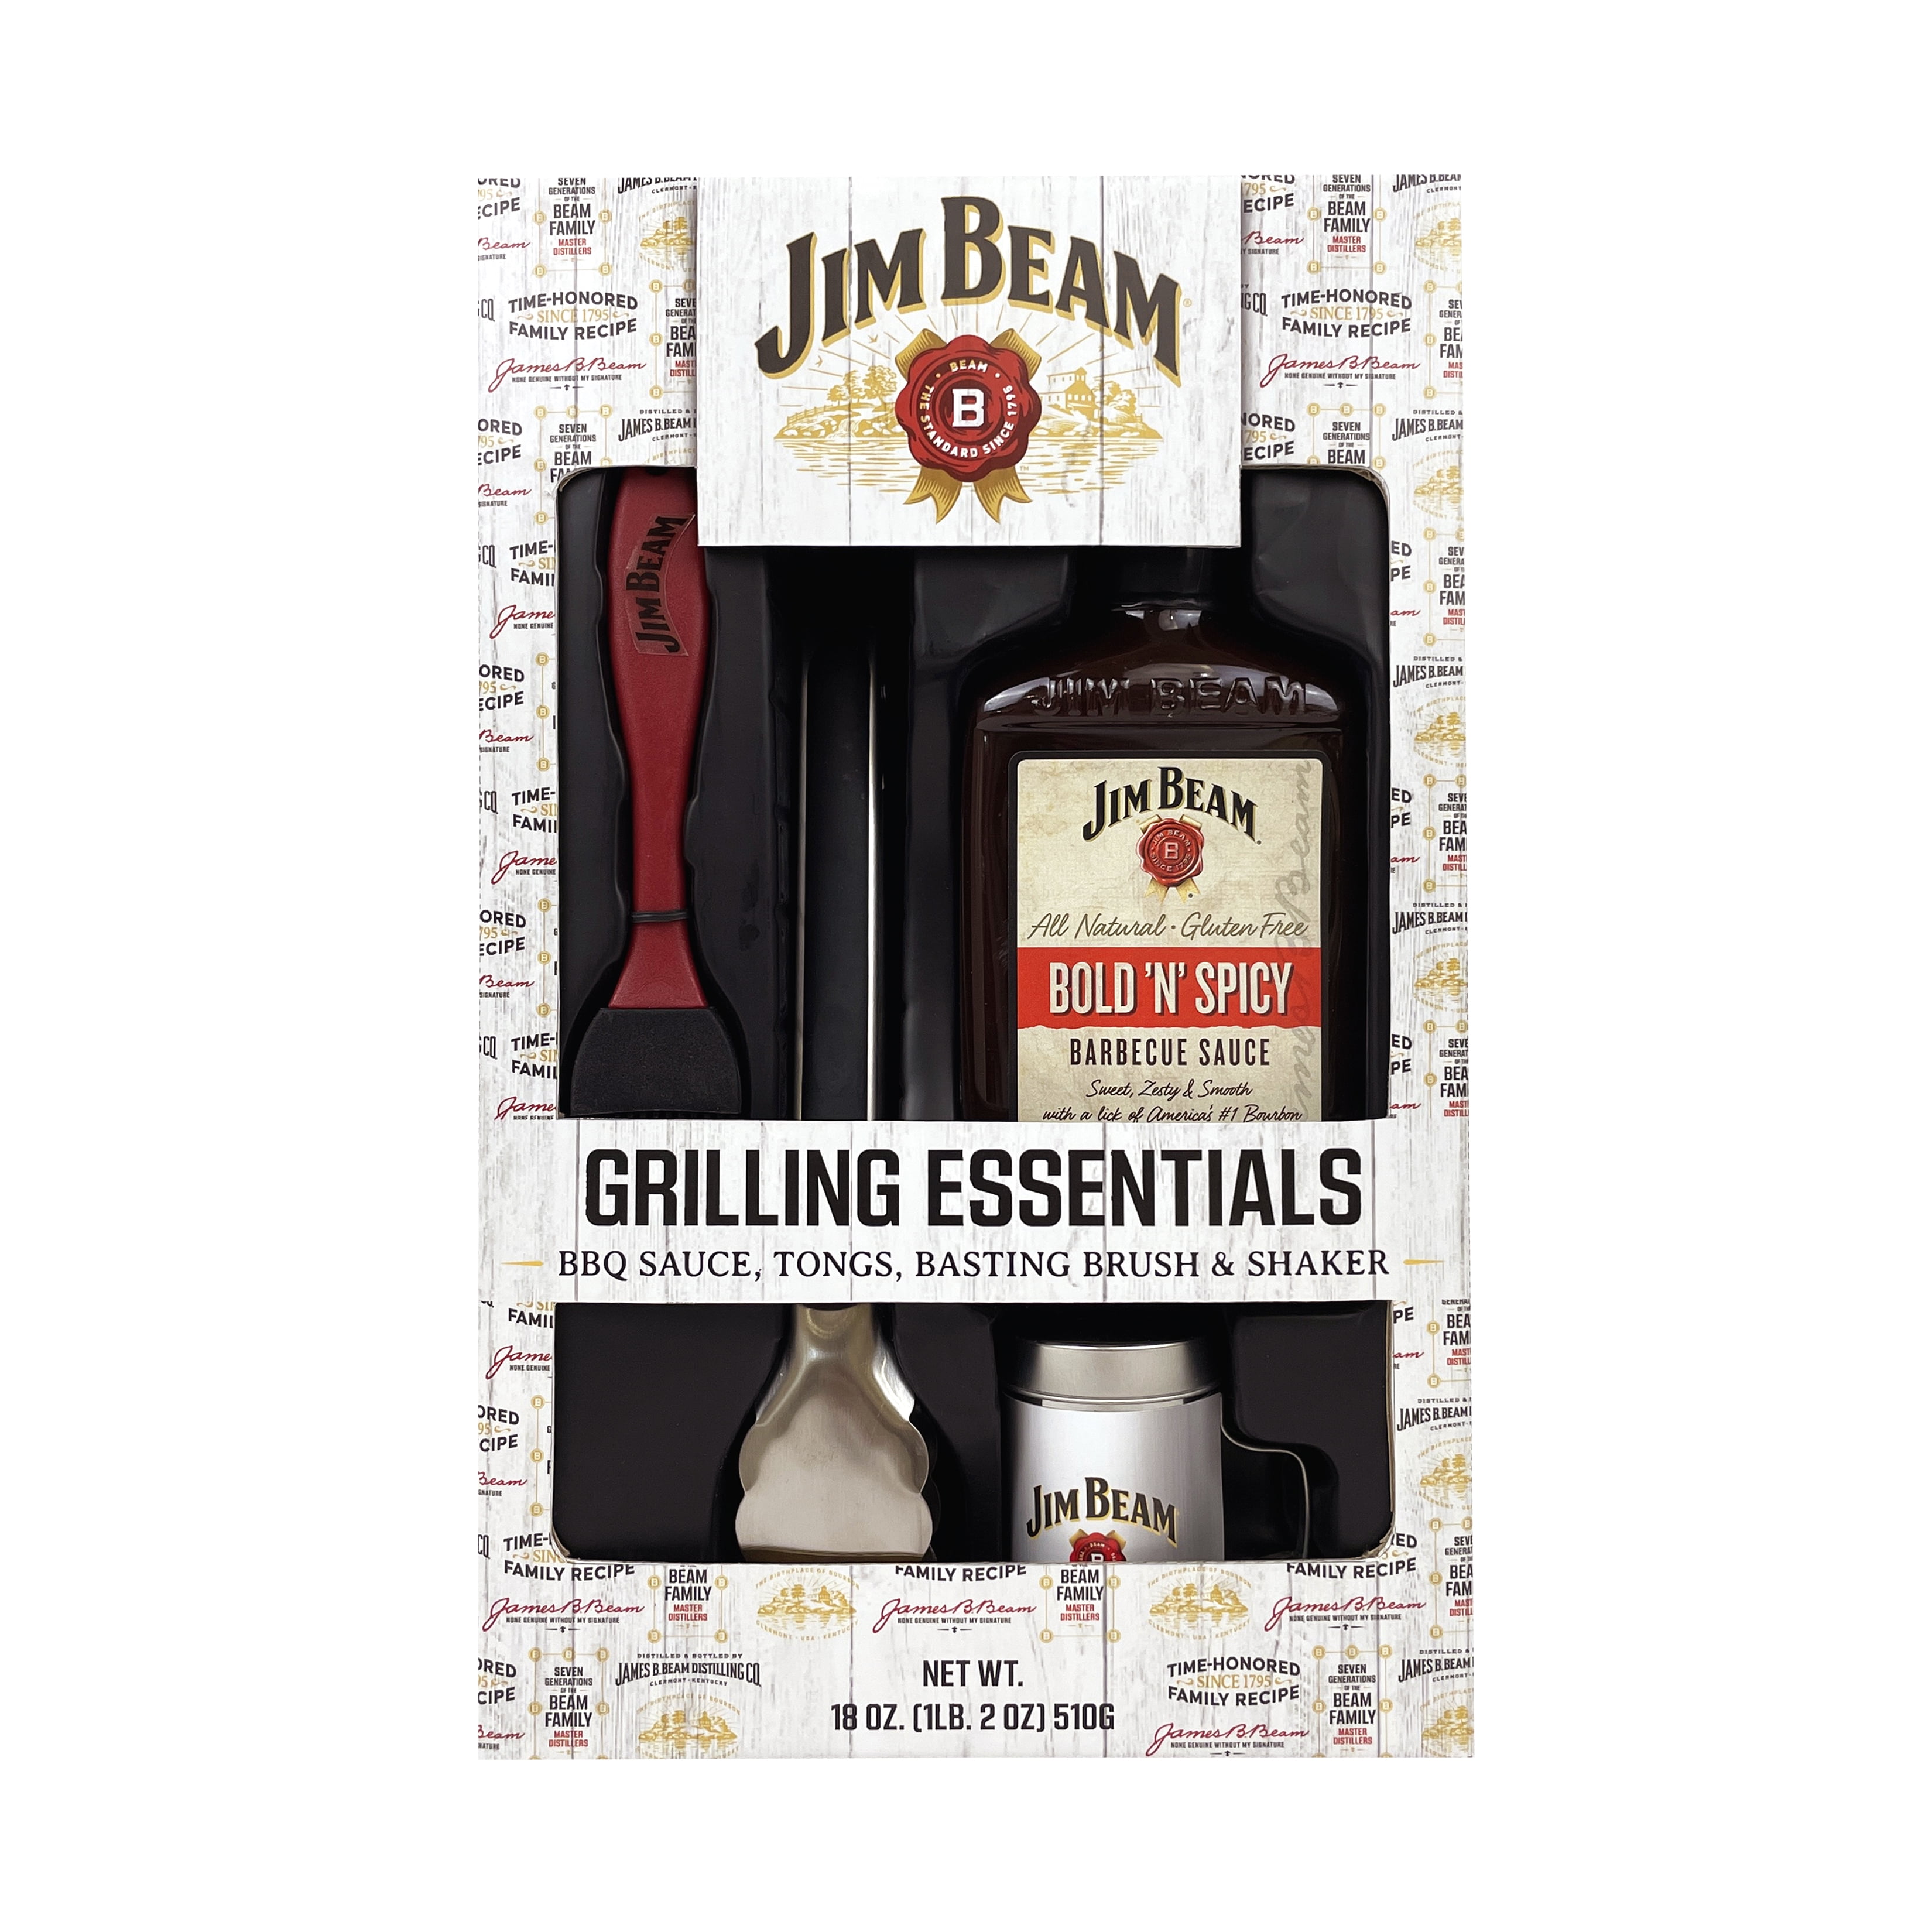 Jim Beam Deluxe BBQ Gift Includes 18oz of Original Barbeque Sauce and  Tools-MSRF